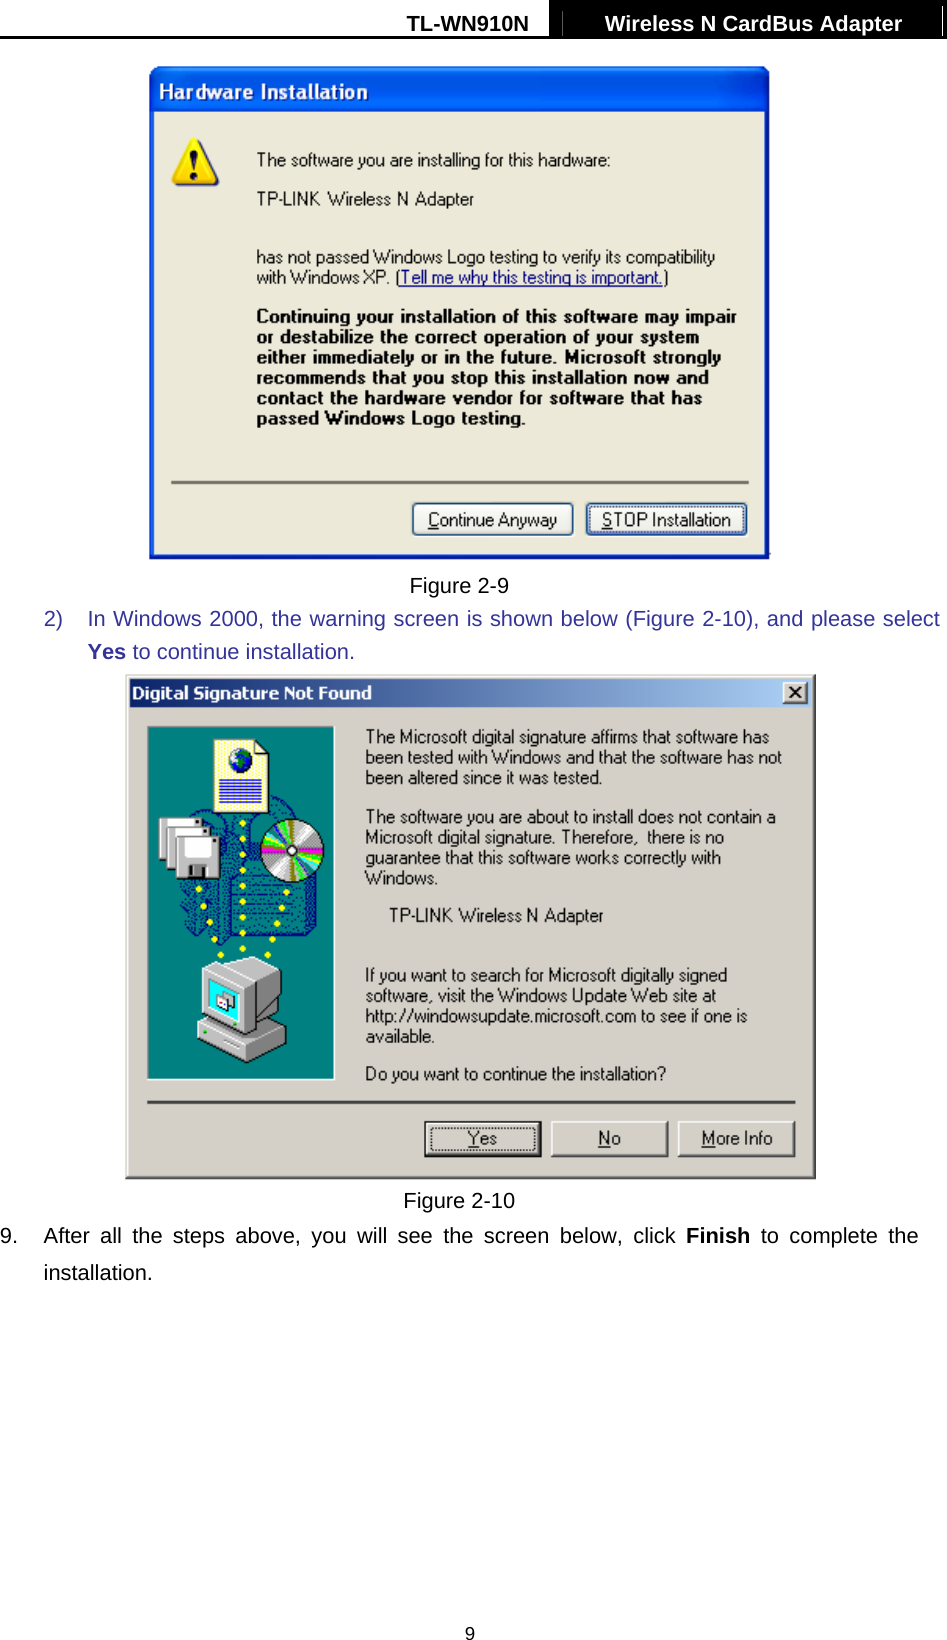 TL-WN910N  Wireless N CardBus Adapter   9 Figure 2-9 2)  In Windows 2000, the warning screen is shown below (Figure 2-10), and please select Yes to continue installation.  Figure 2-10 9.  After all the steps above, you will see the screen below, click Finish to complete the installation. 